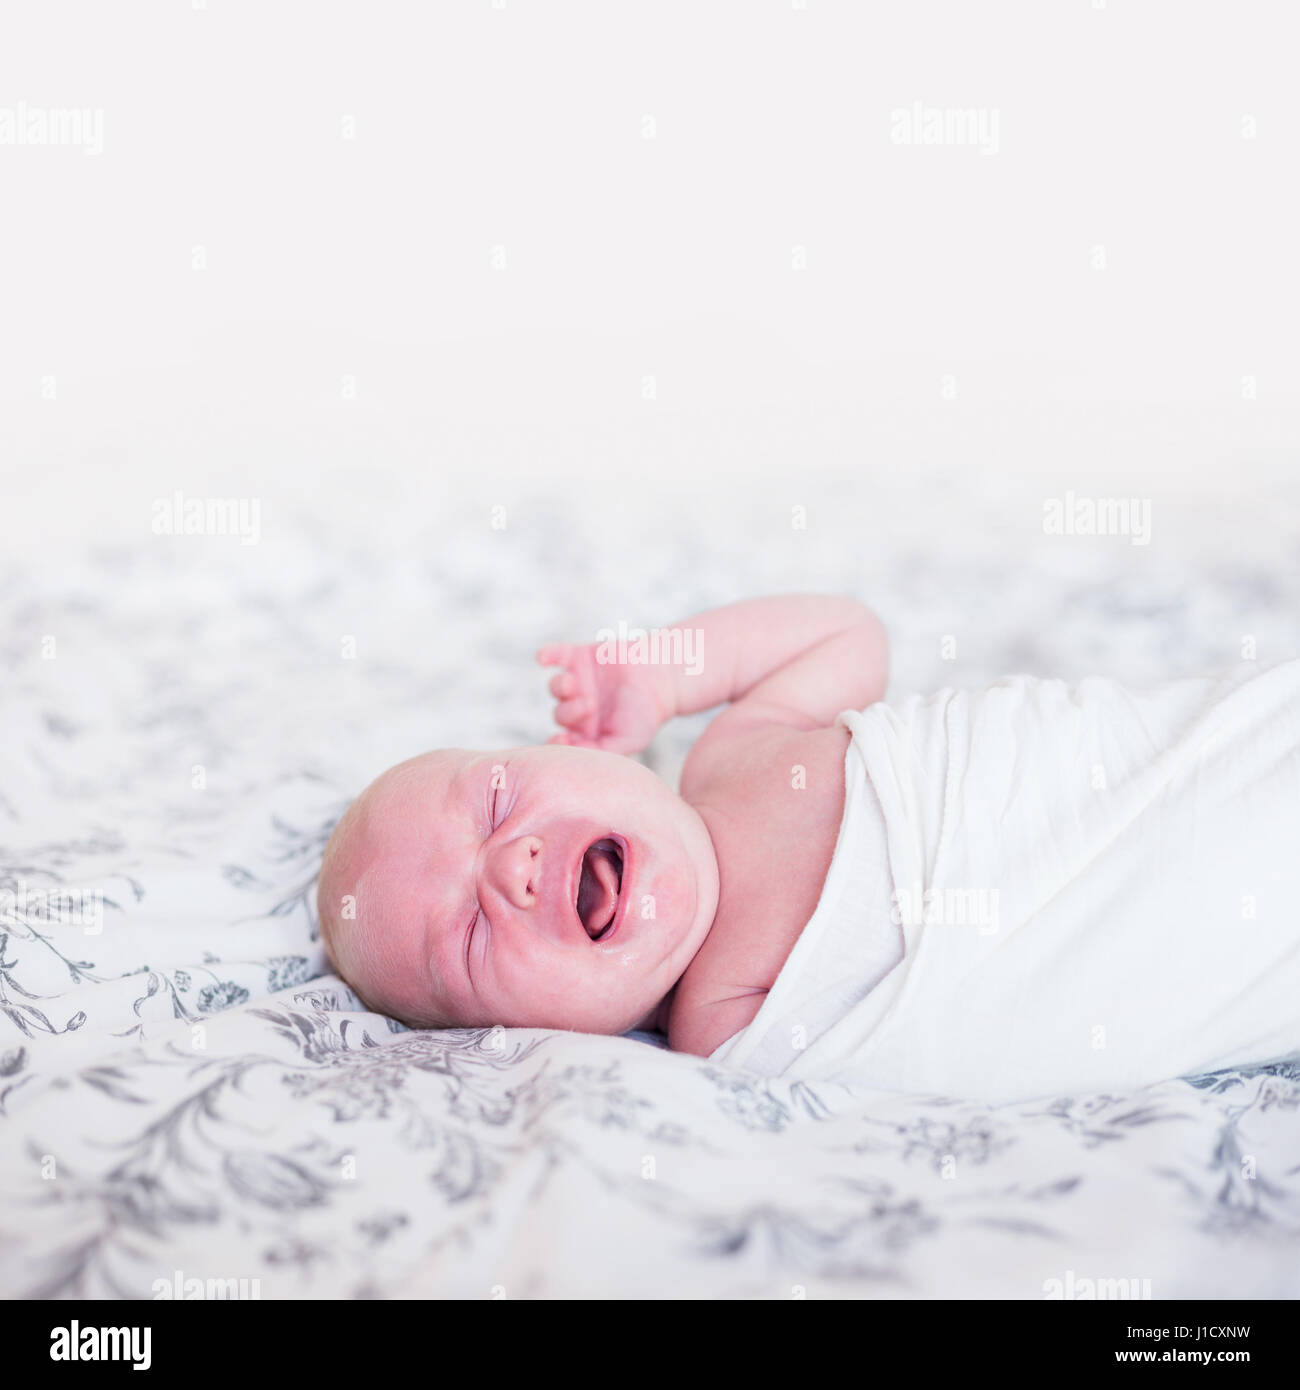 Newborn baby crying in bed. Natural light, shallow depth of field, copy space. Stock Photo